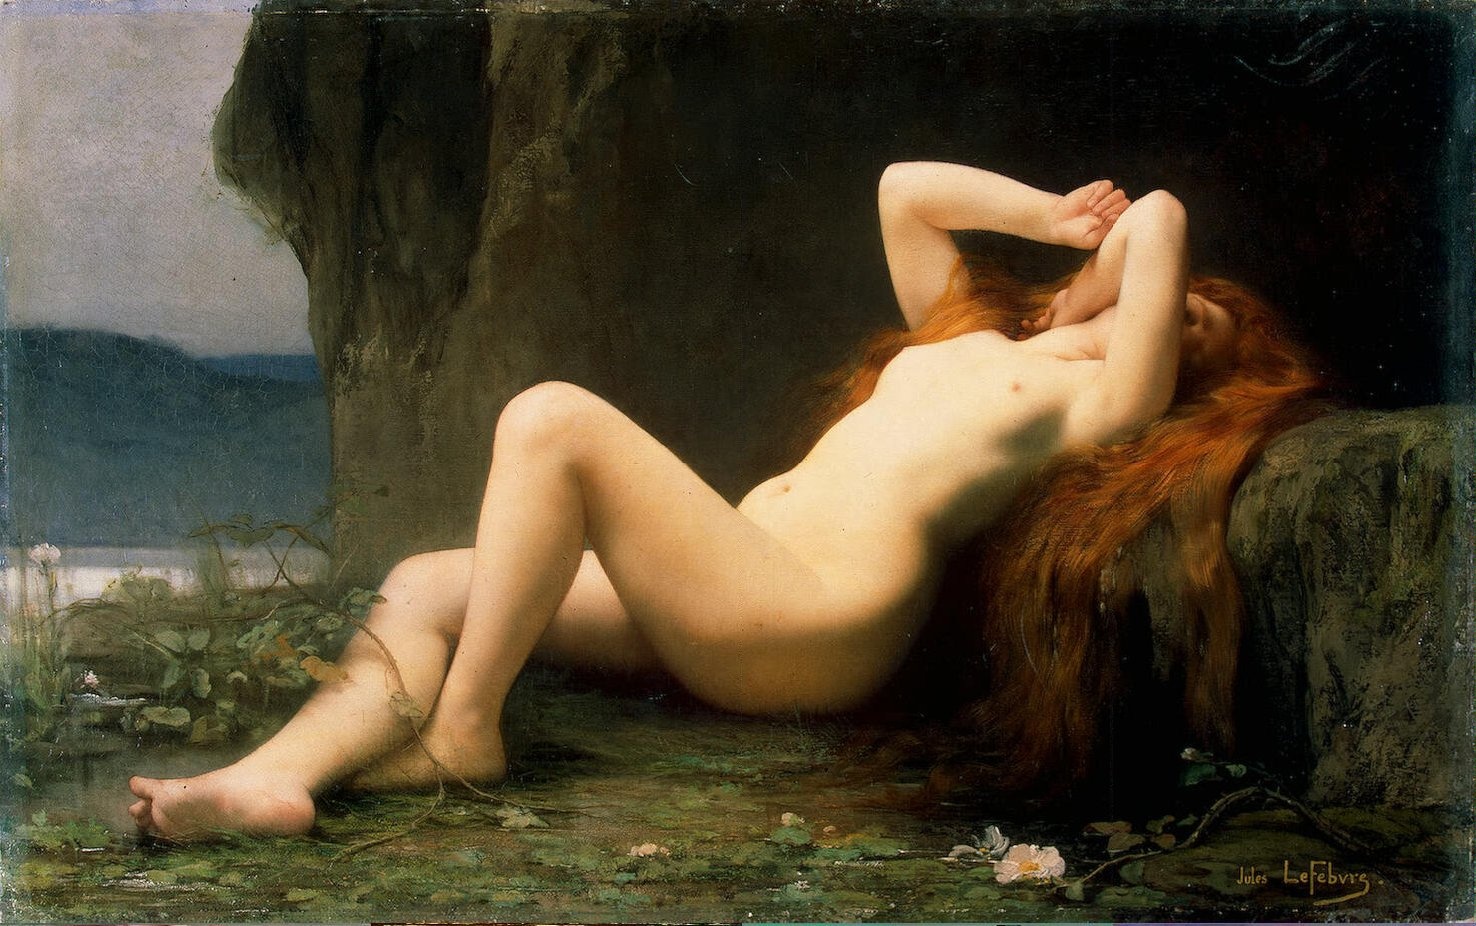 This painting, by Jules Joseph Lefebvre in the late 1800's, is called Mary Magdalene In the Cave, depicting her hanging around waiting for Jesus/getting divine transmission in an ecstatic way. There are whole other bunch of paintings like this by other victorian-era orientalist painters and it makes me MAD. She's a saint, a holy woman, again, a SAINT in this tradition that is all oo-er sexuality is bad, painted literally just so men could see nekkid ladies. Would they use st Peter, or st Thomas in such an erotic way? No they fucking would not. 